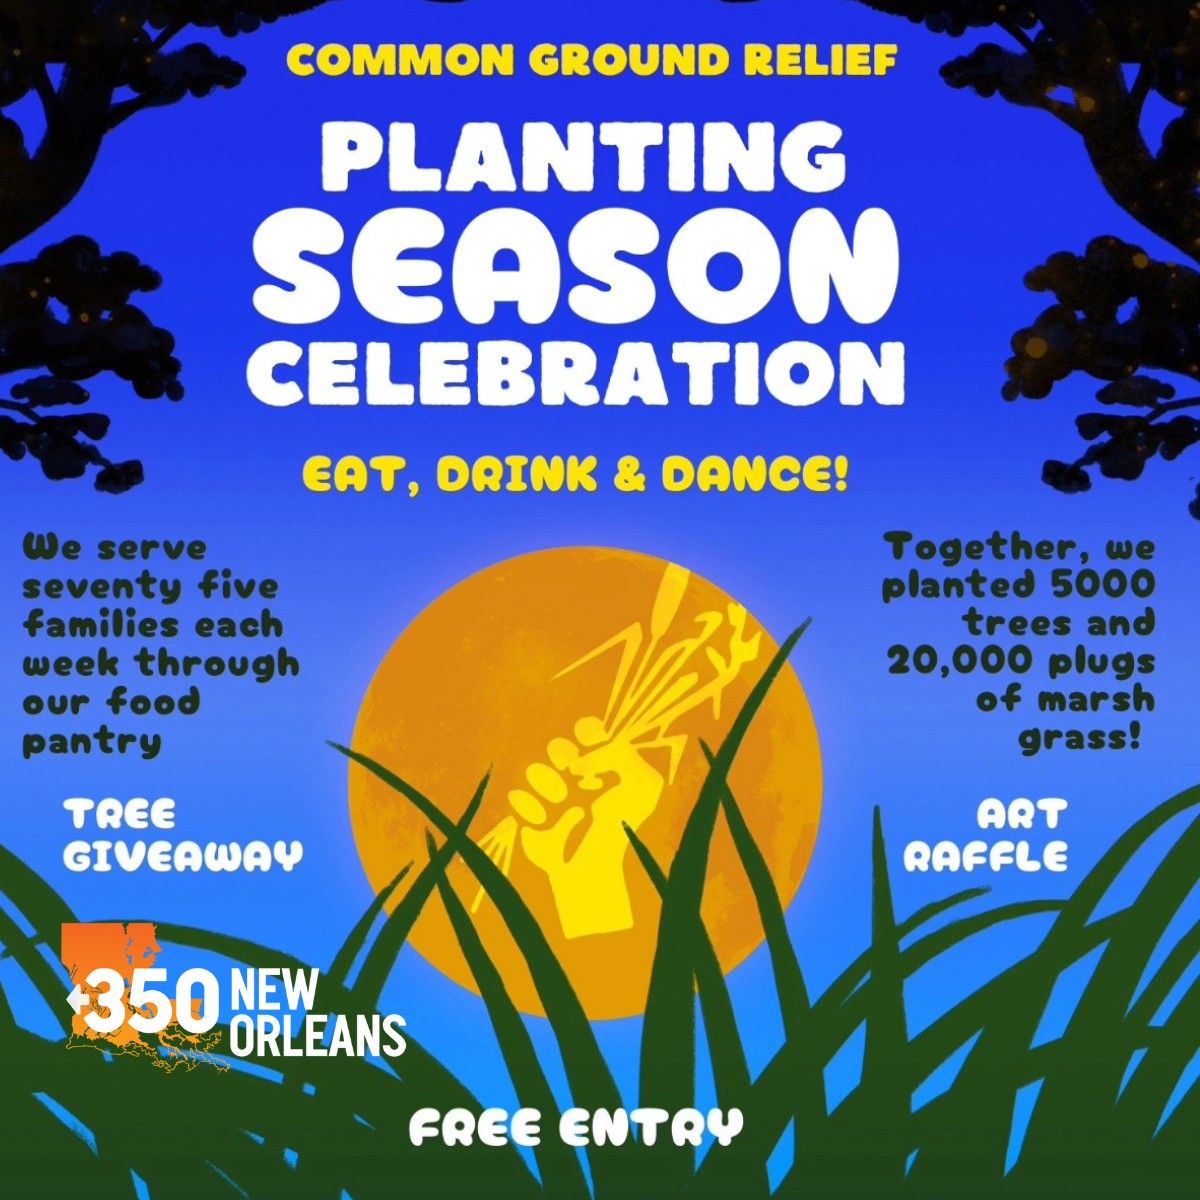 350 New Orleans Social: Celebrating Common Ground Relief